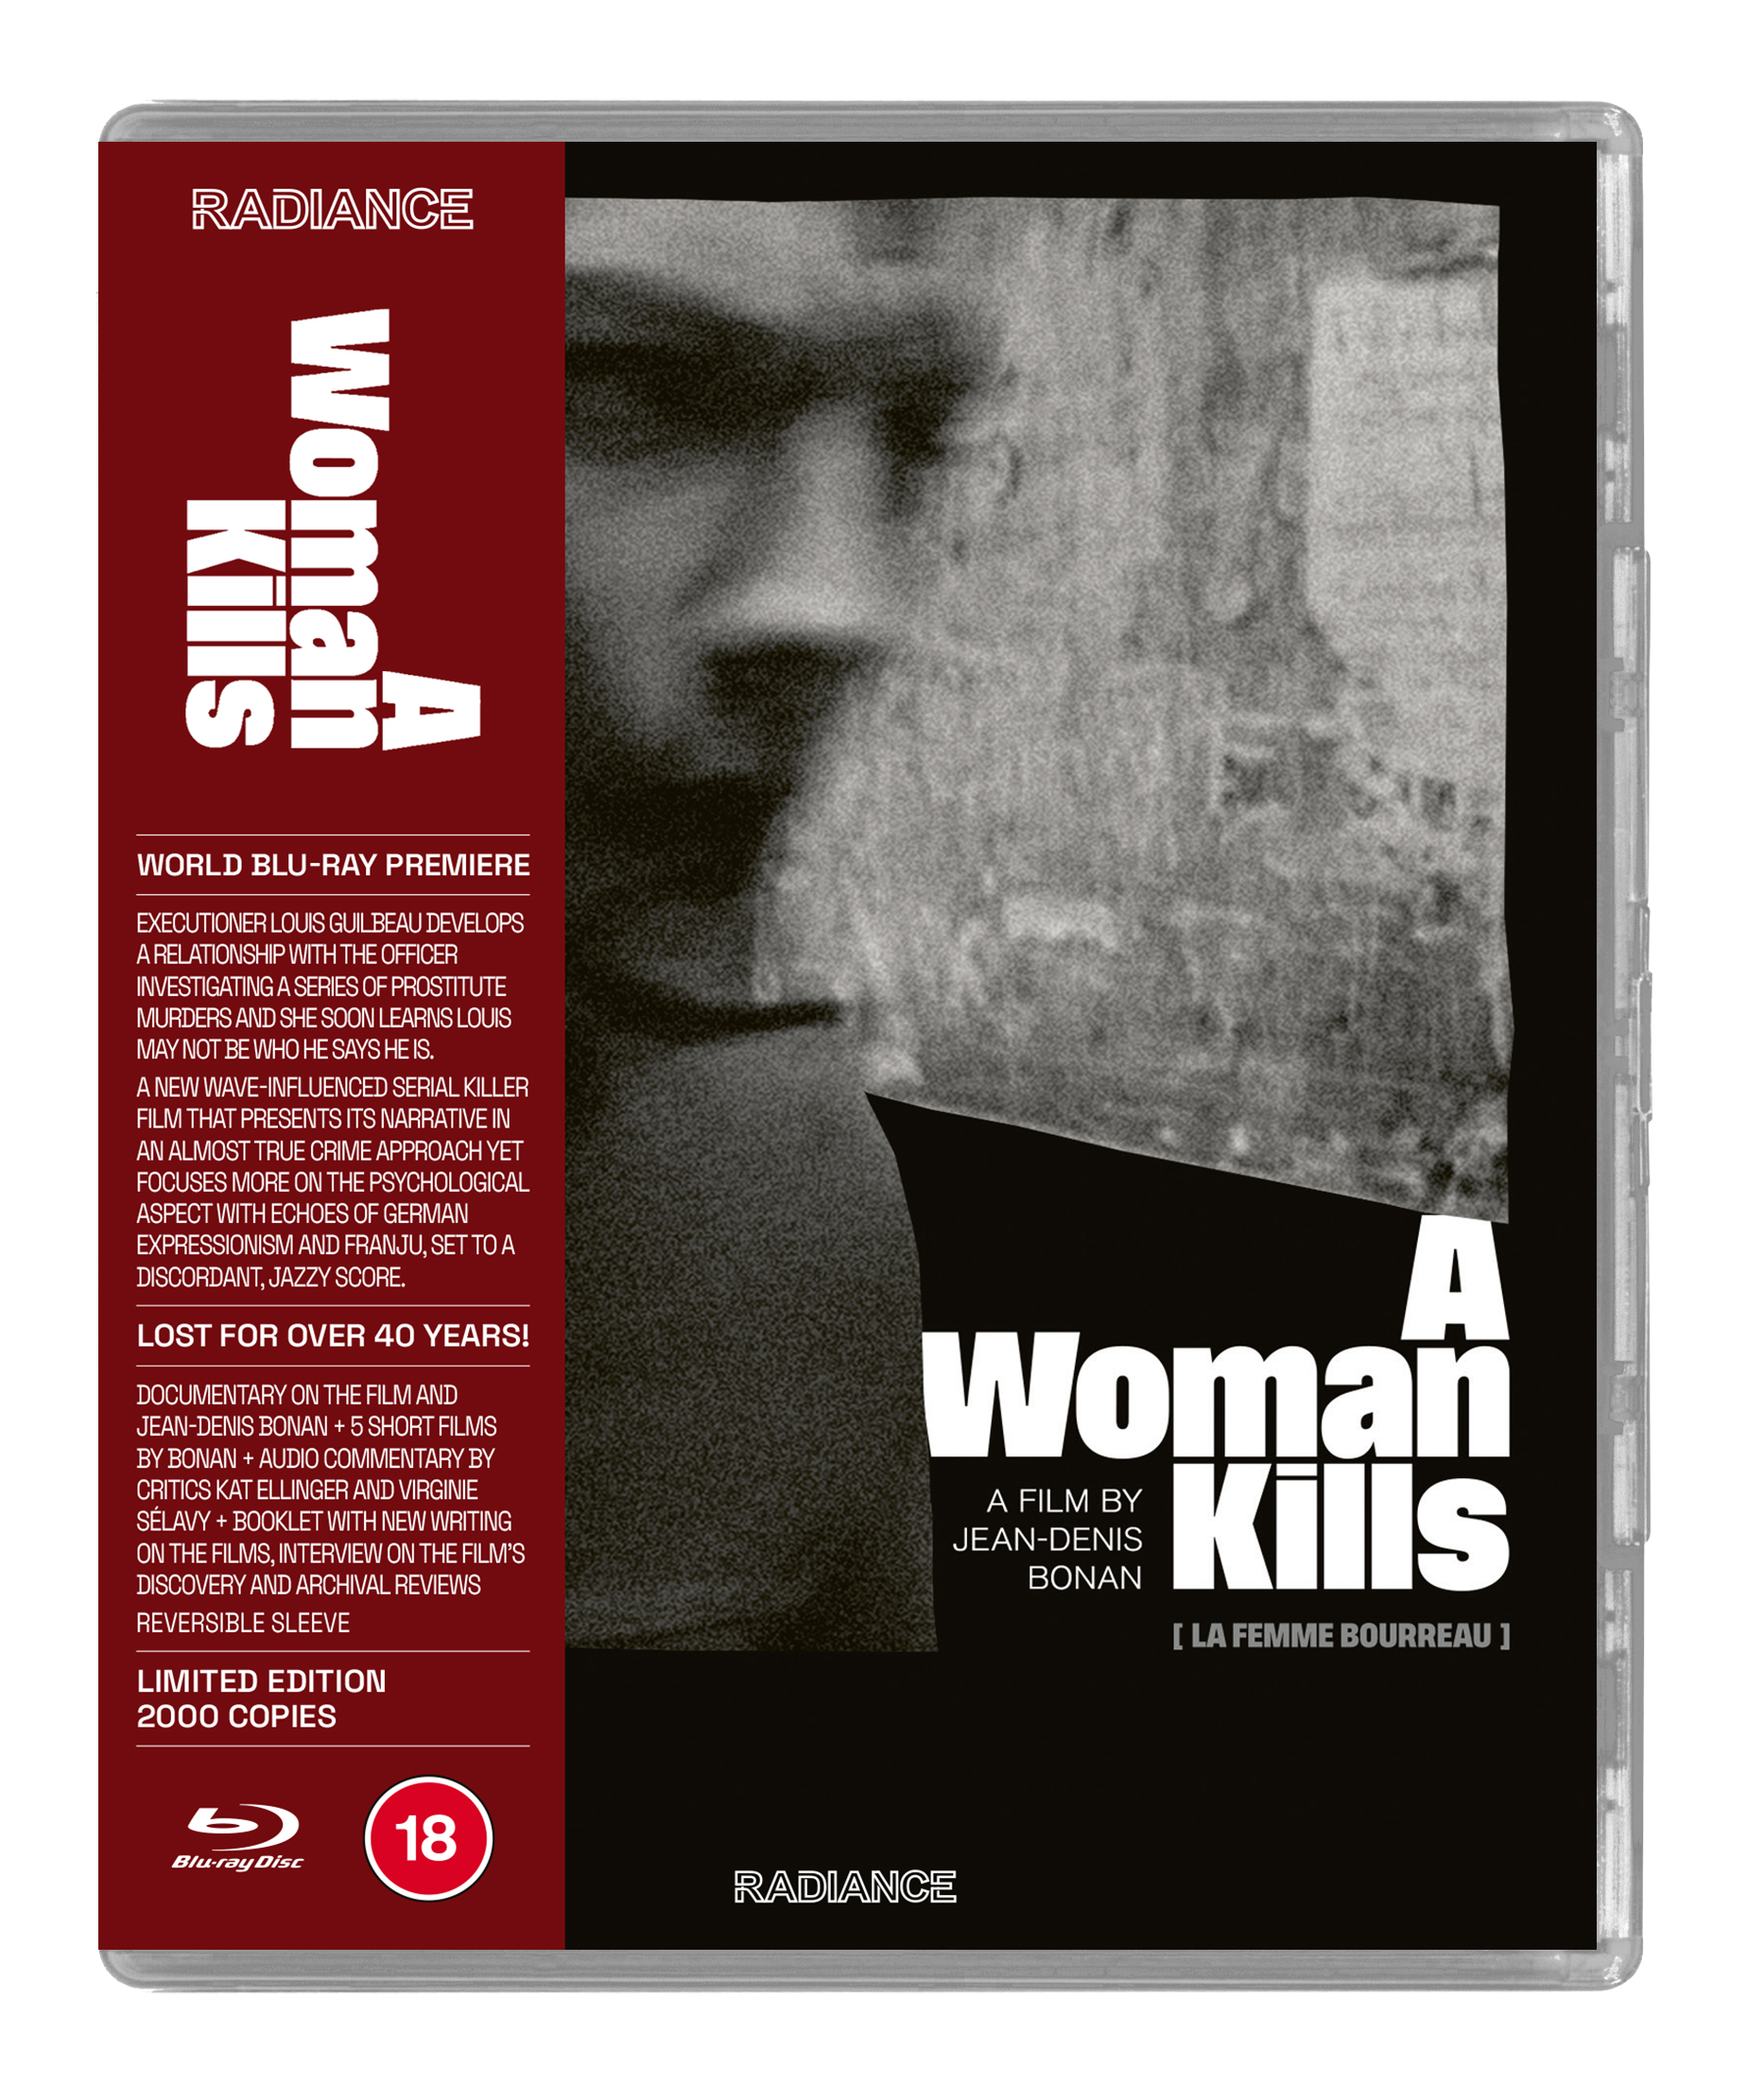 Radiance Films on X: A Woman Kills is released 🇬🇧 today (🇺🇸🇨🇦  tomorrow) this crazy and fascinating package, a world premiere on Blu-ray  has much to explore. Thanks to @SelavyVirginie @kat_diabolique  @CateWheatley @